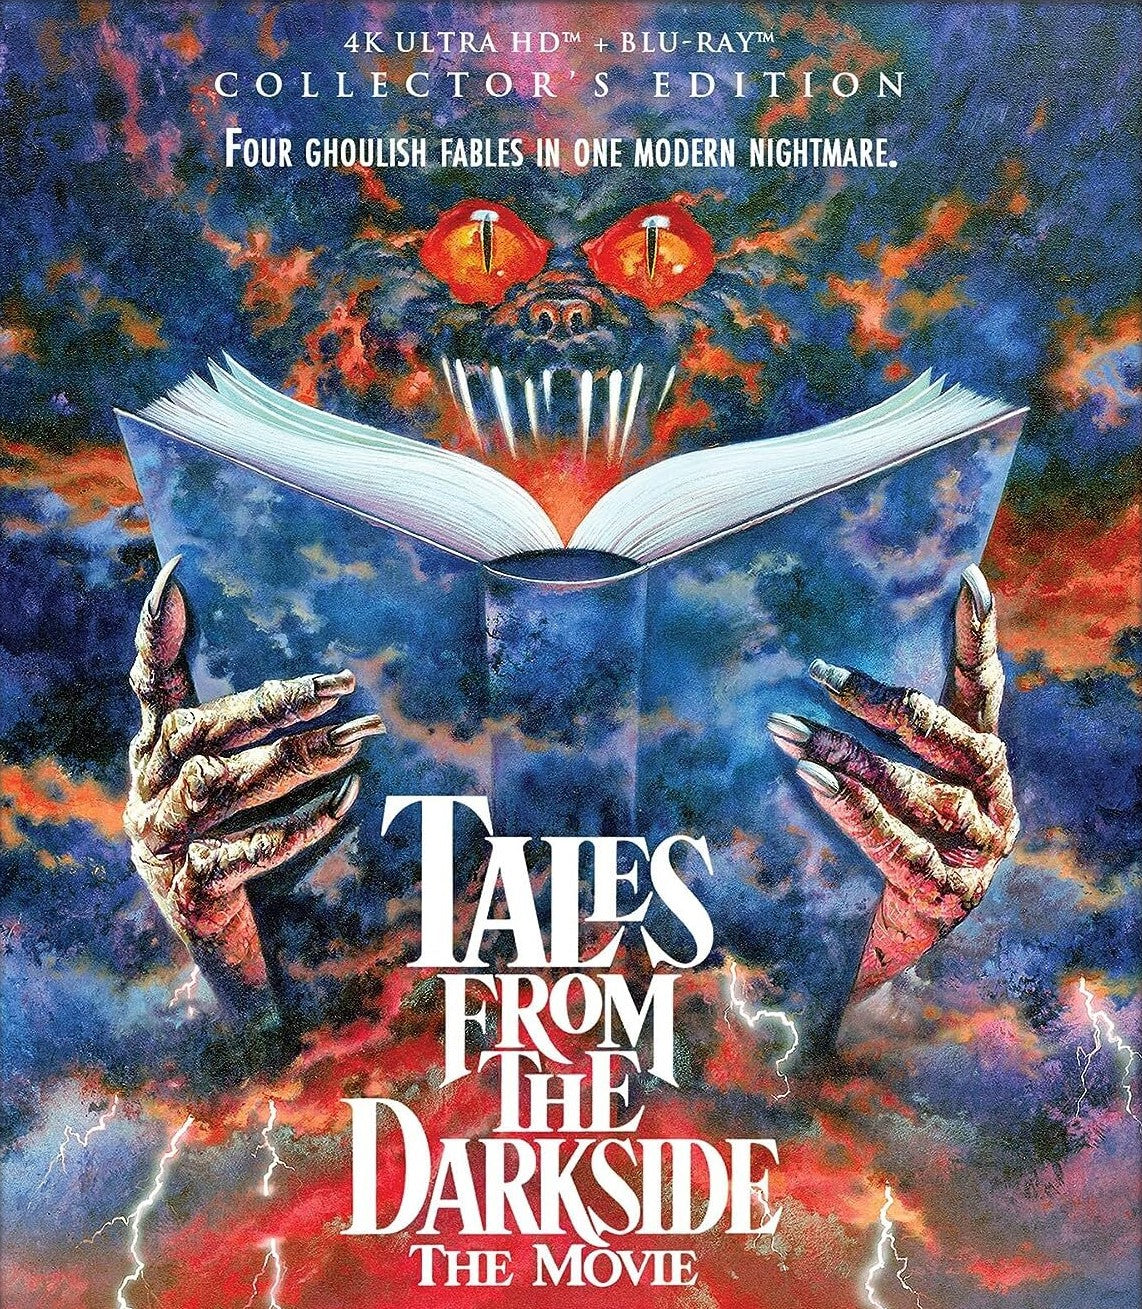 TALES FROM THE DARKSIDE: THE MOVIE (COLLECTOR'S EDITION) 4K UHD/BLU-RAY